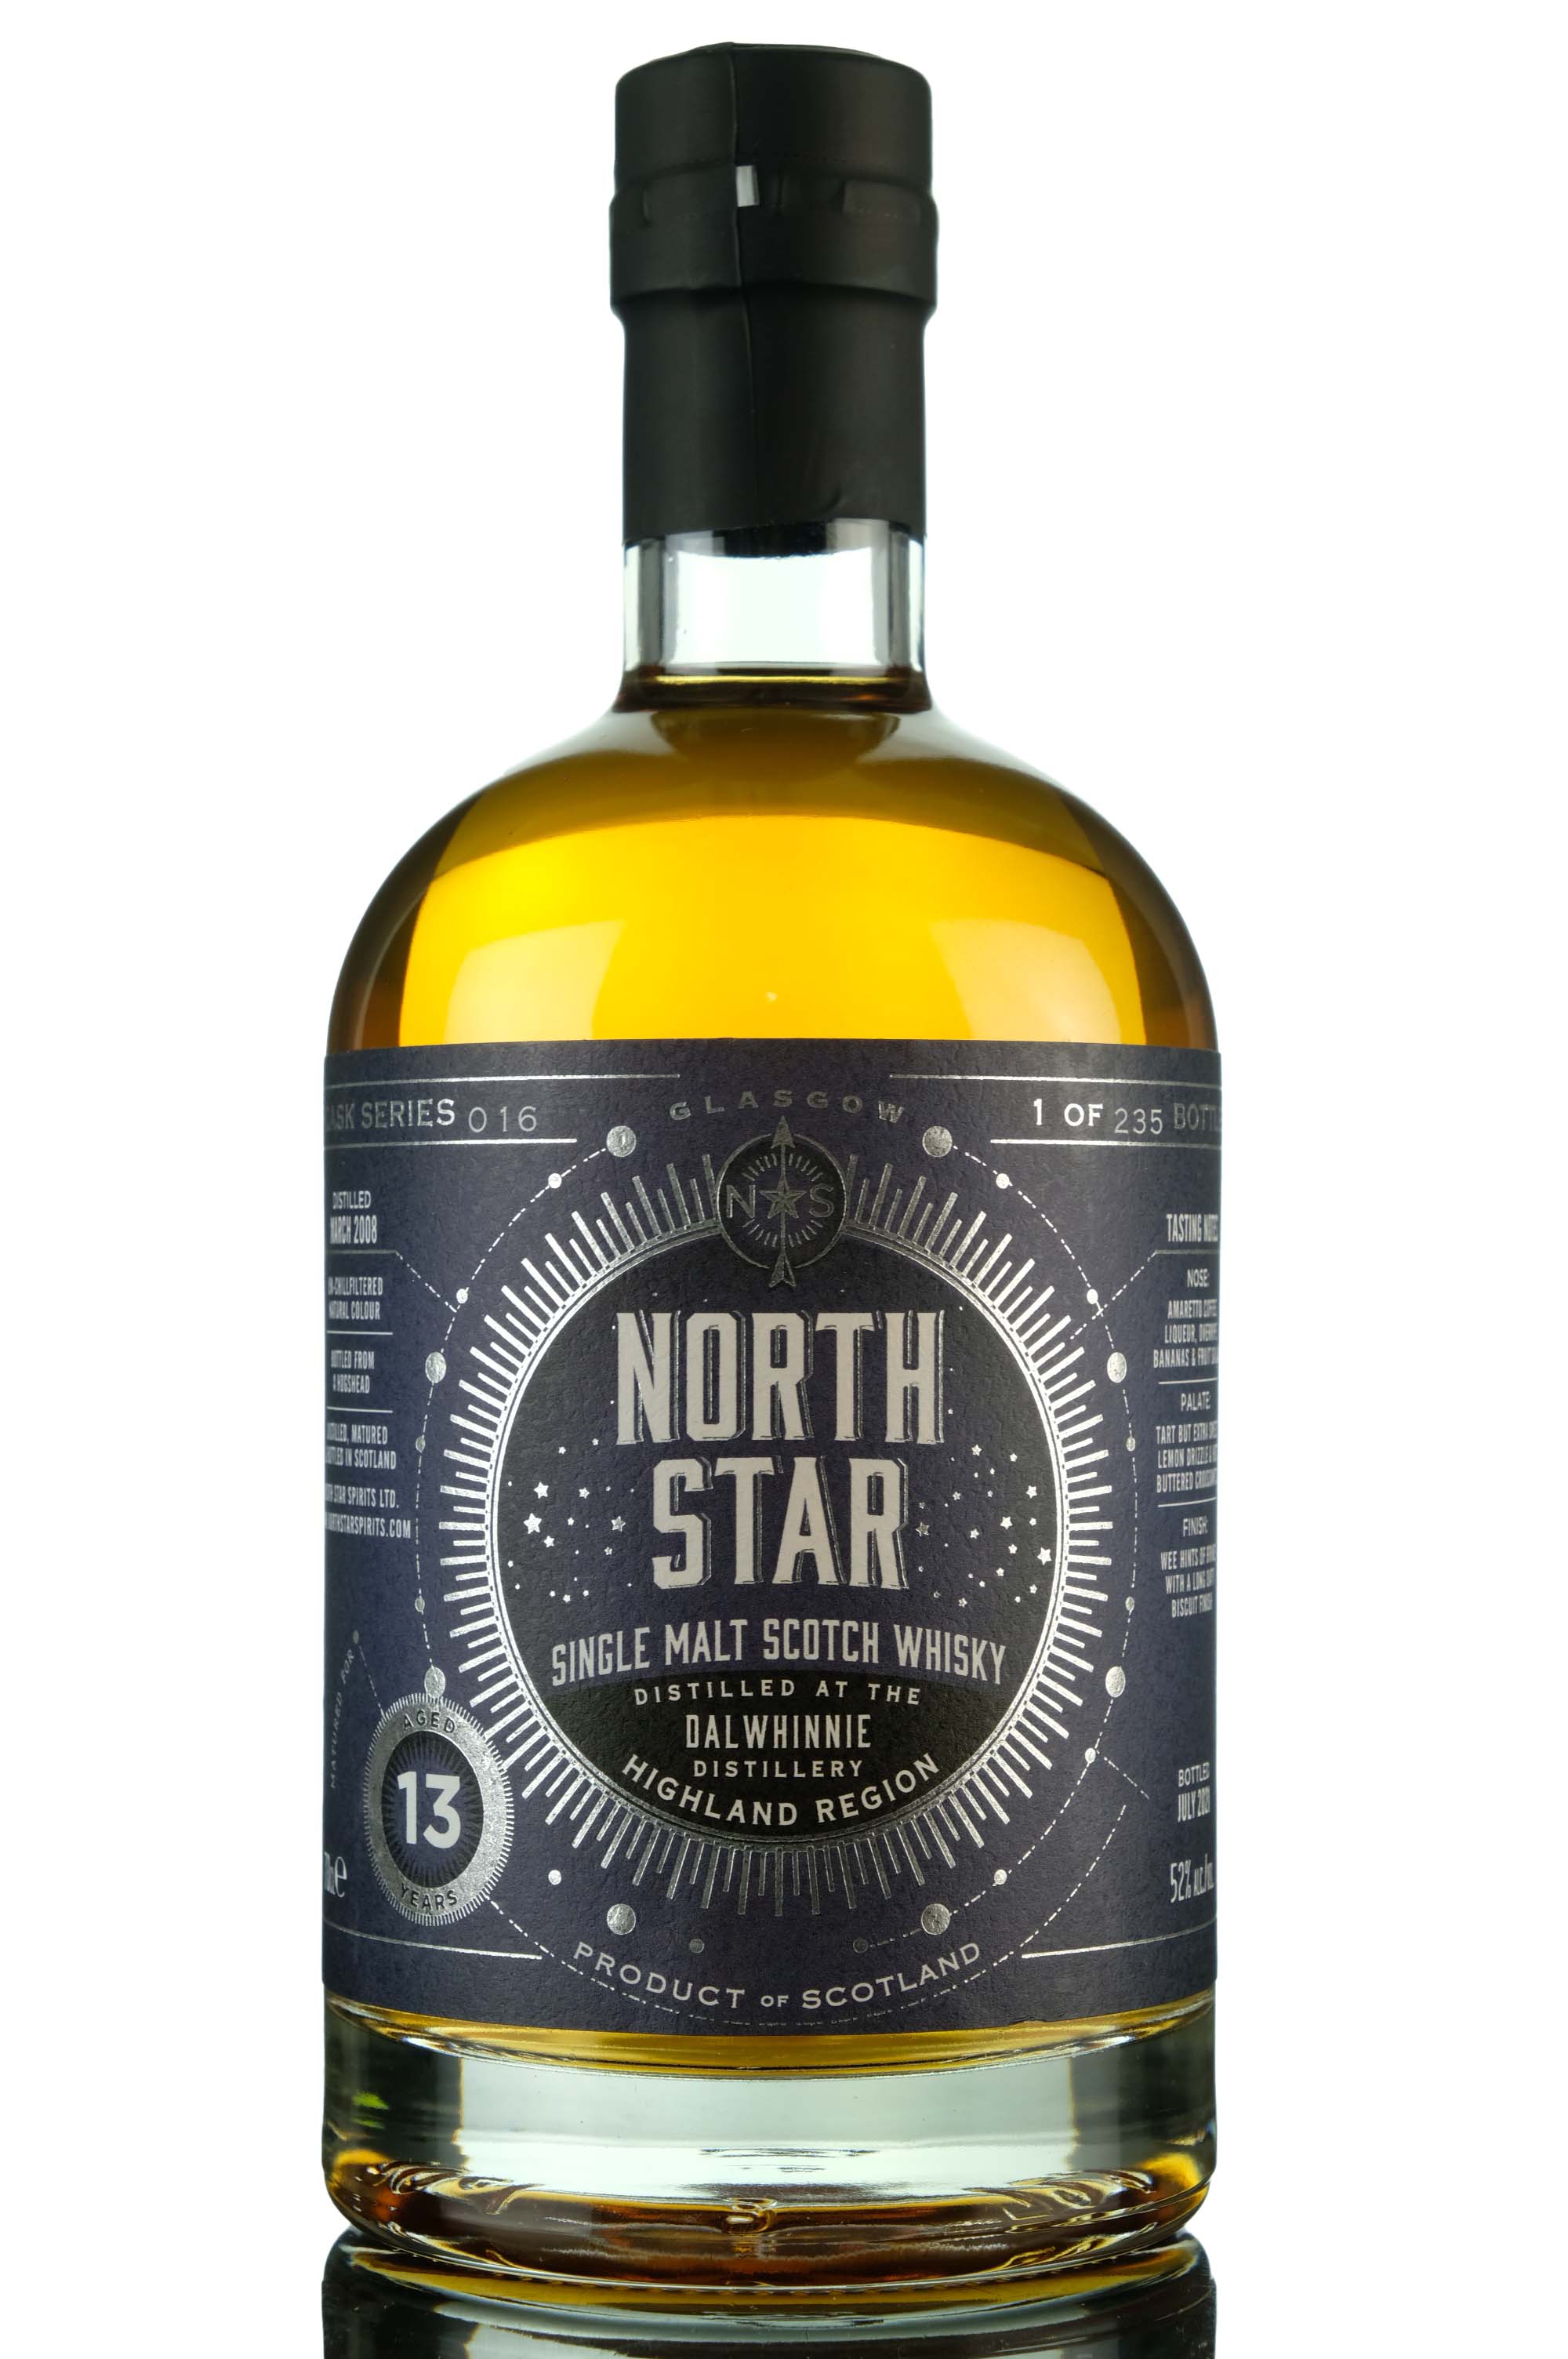 Dalwhinnie 2008-2021 - 13 Year Old - North Star Spirits - Cask Series 016 - Single Cask